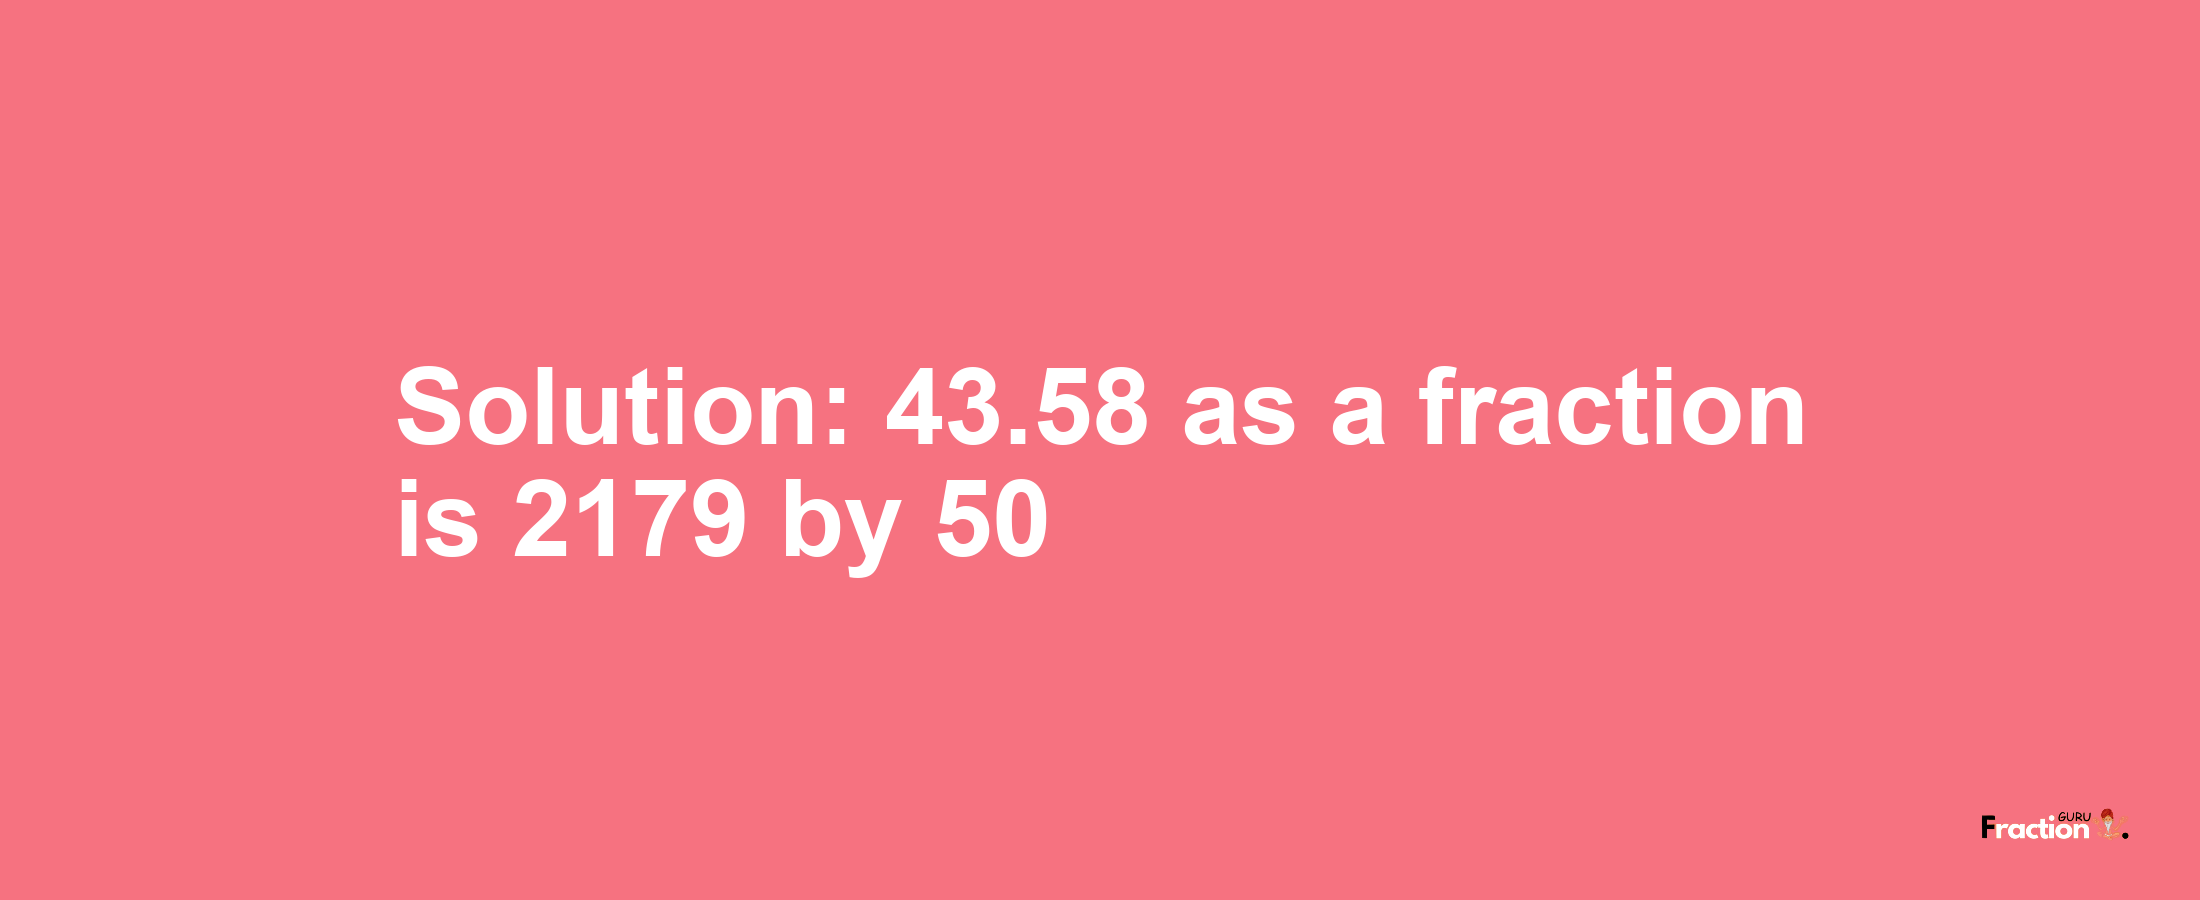 Solution:43.58 as a fraction is 2179/50